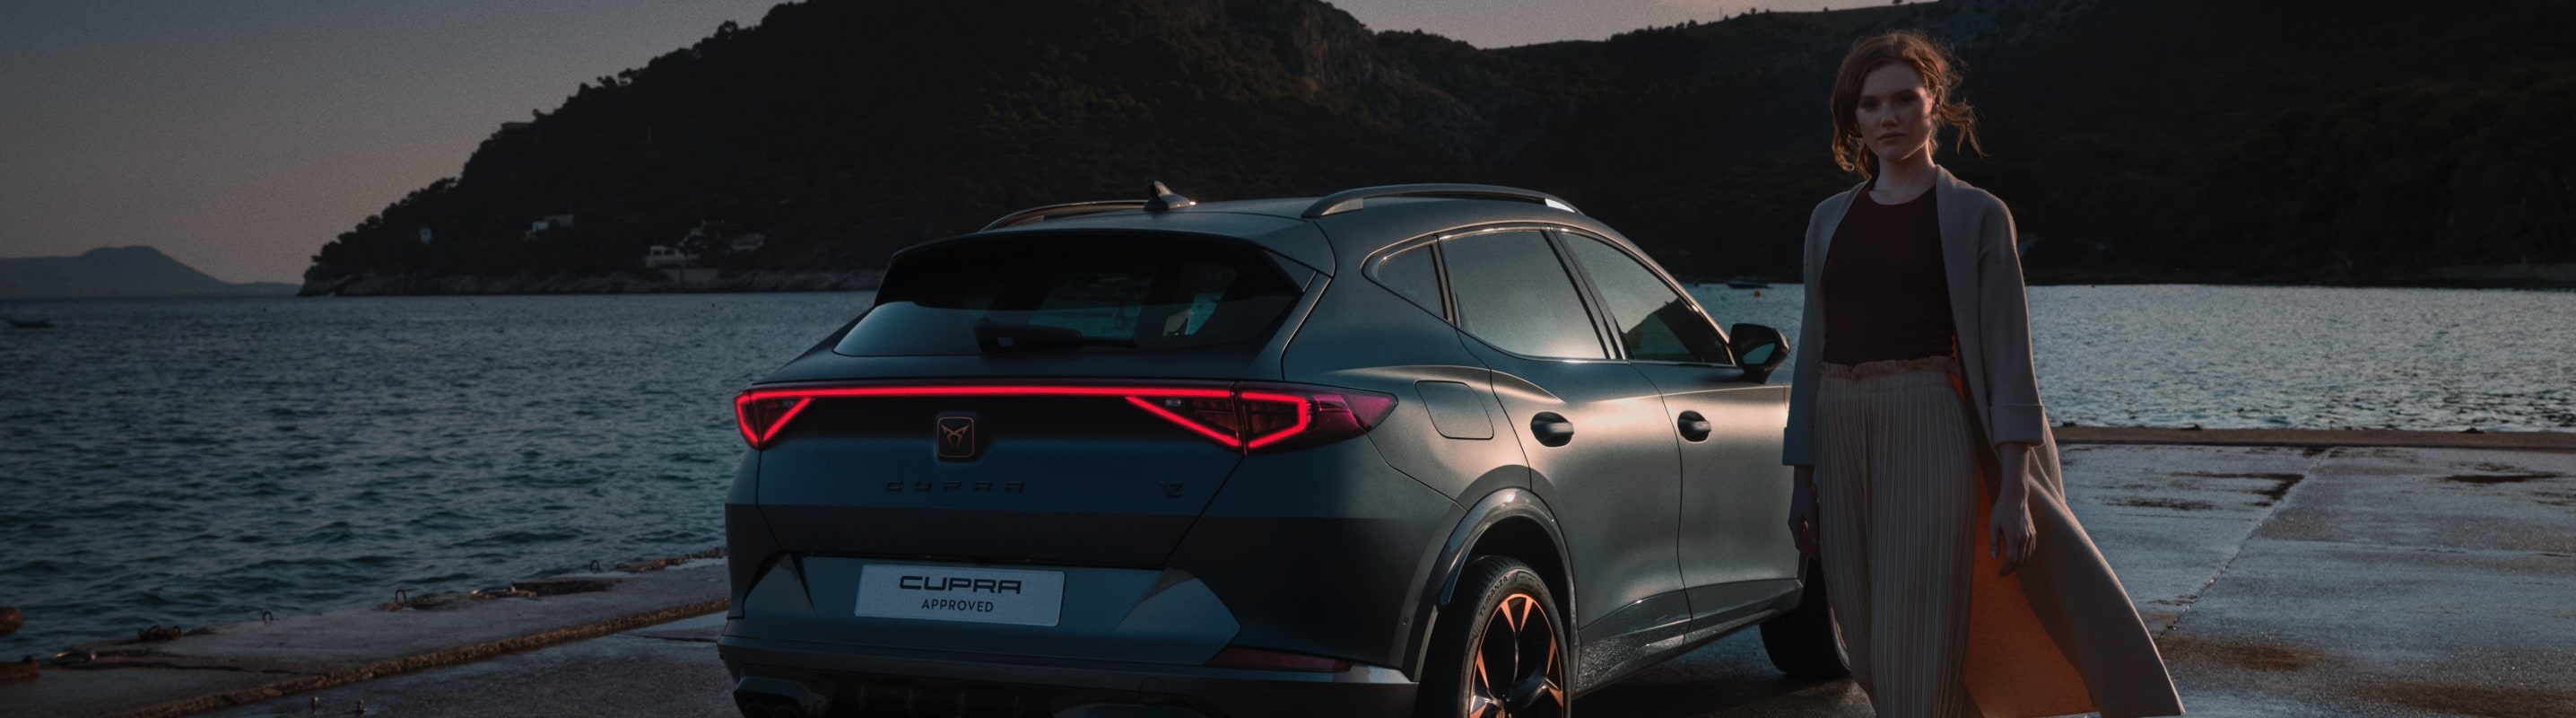 a woman standing next to a rear view of a cupra ateca rodium grey car with full led headlights